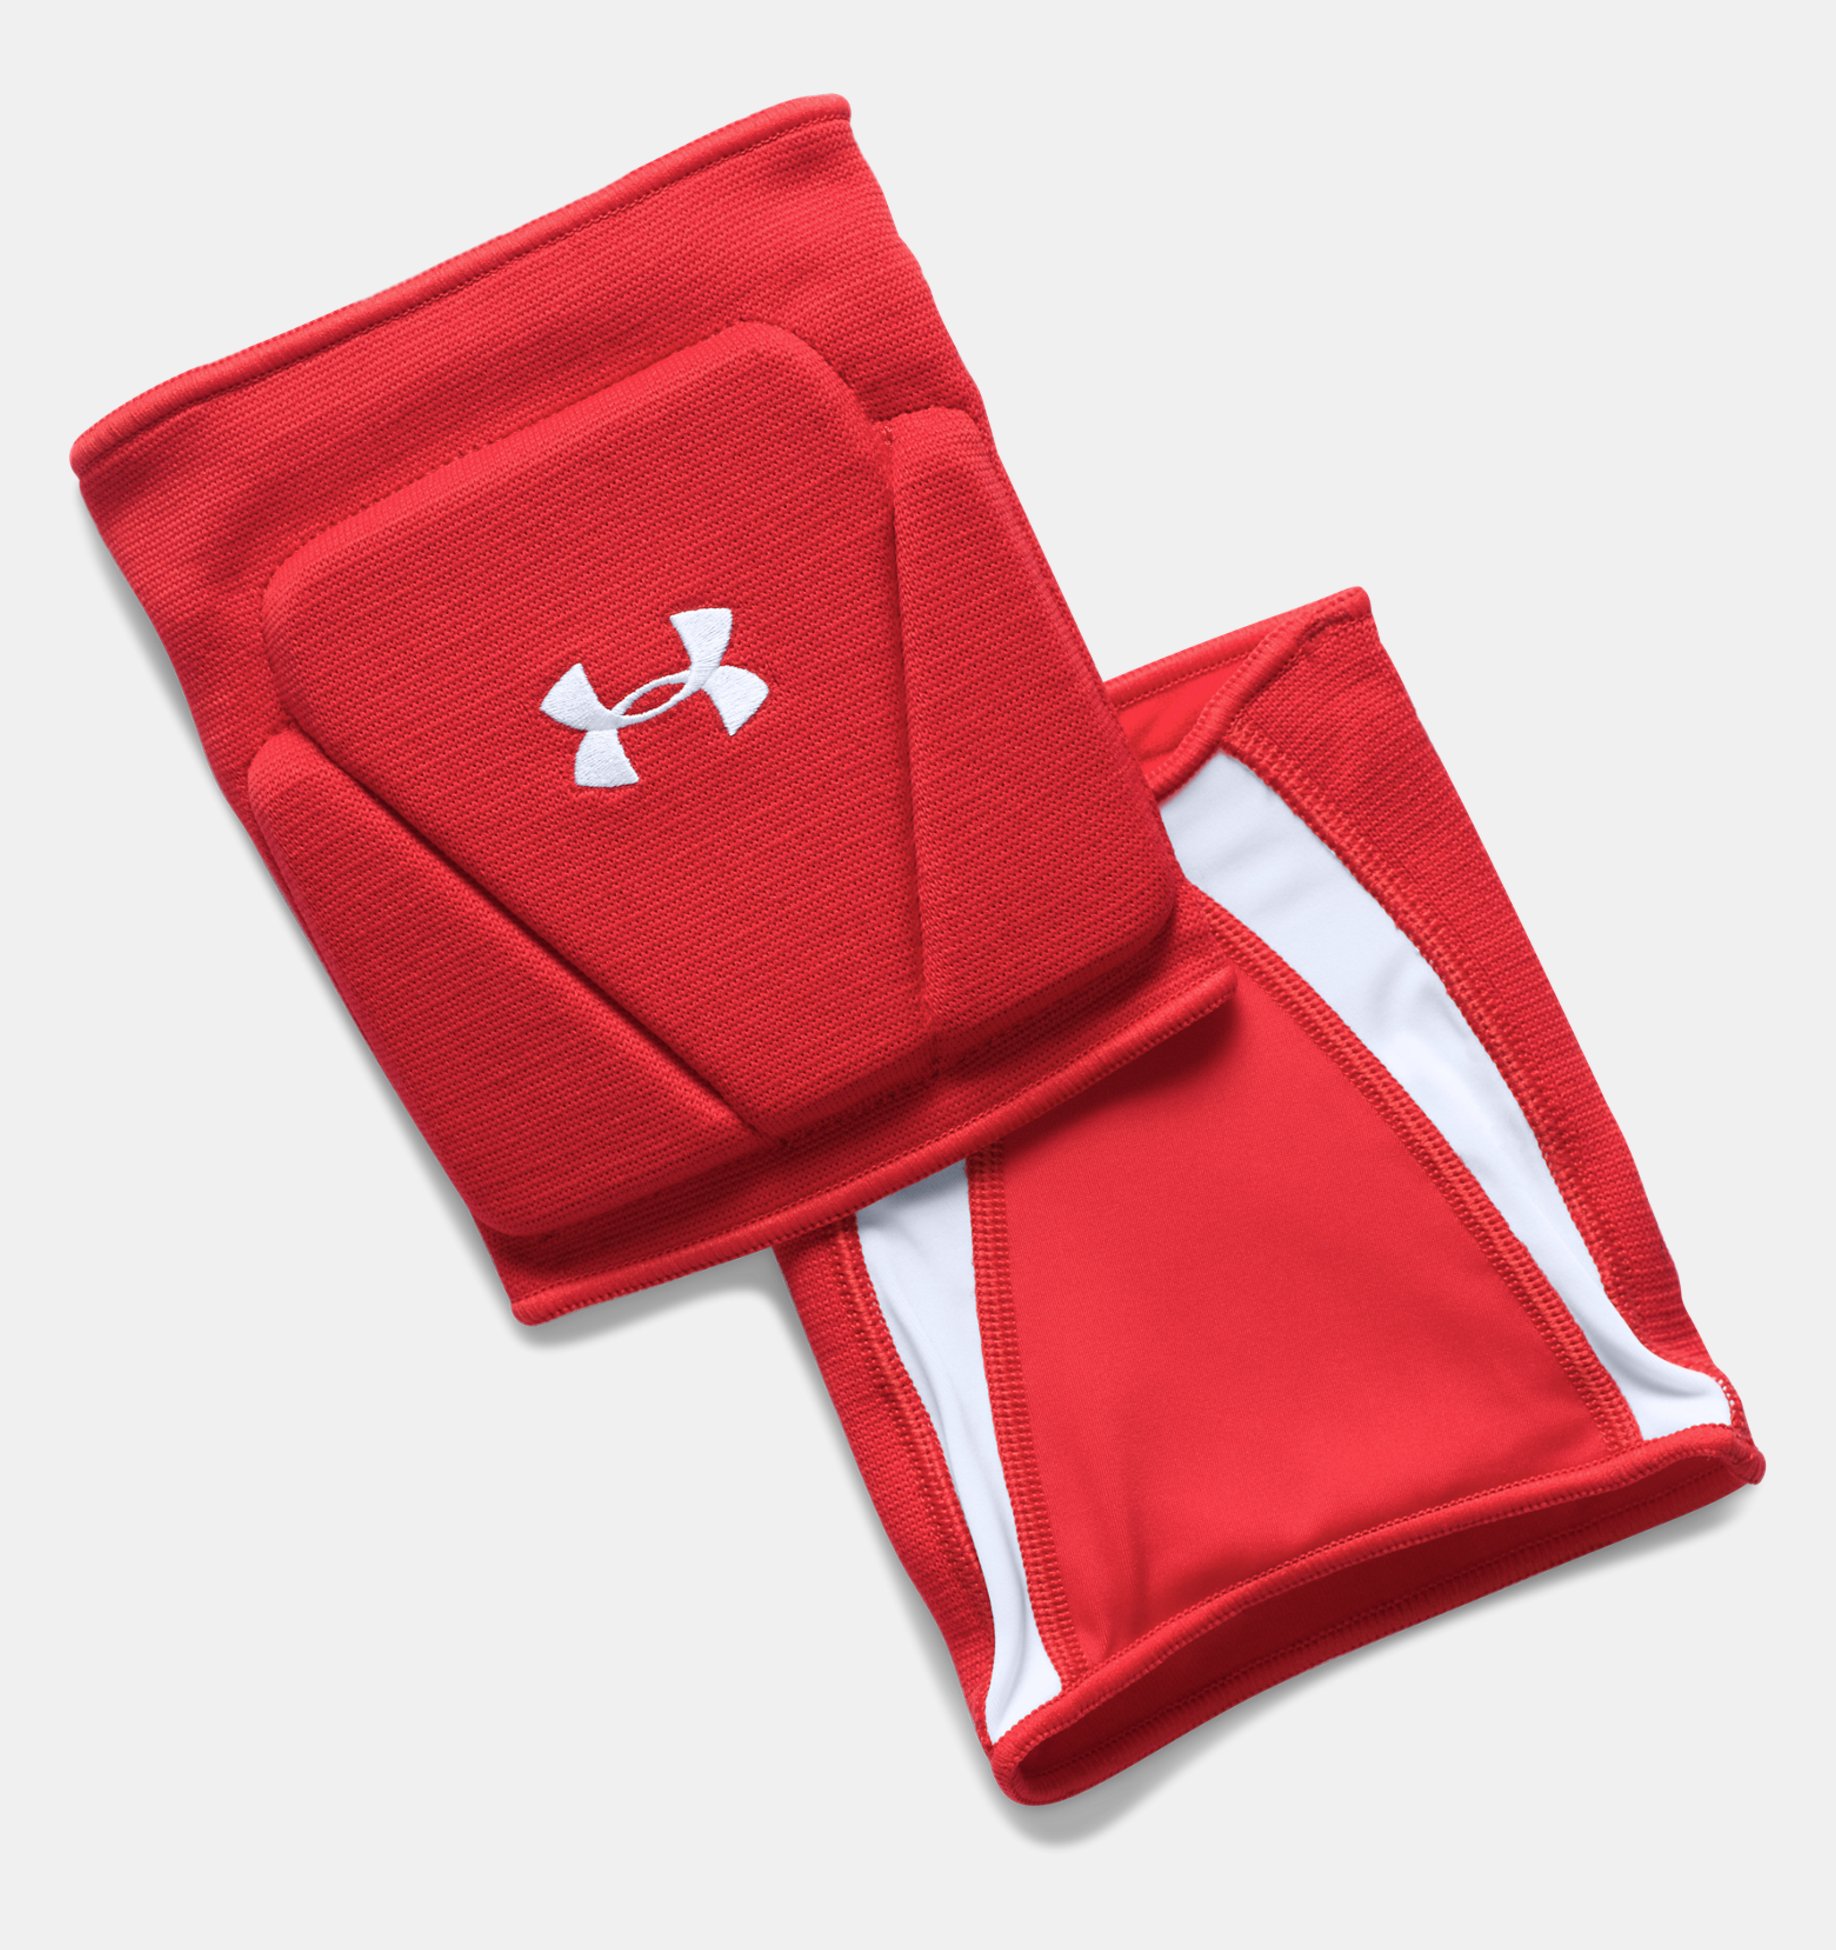 Under Armour UA Strive UniSex Volleyball Knee Pads Size L-M Red 1290868-600 